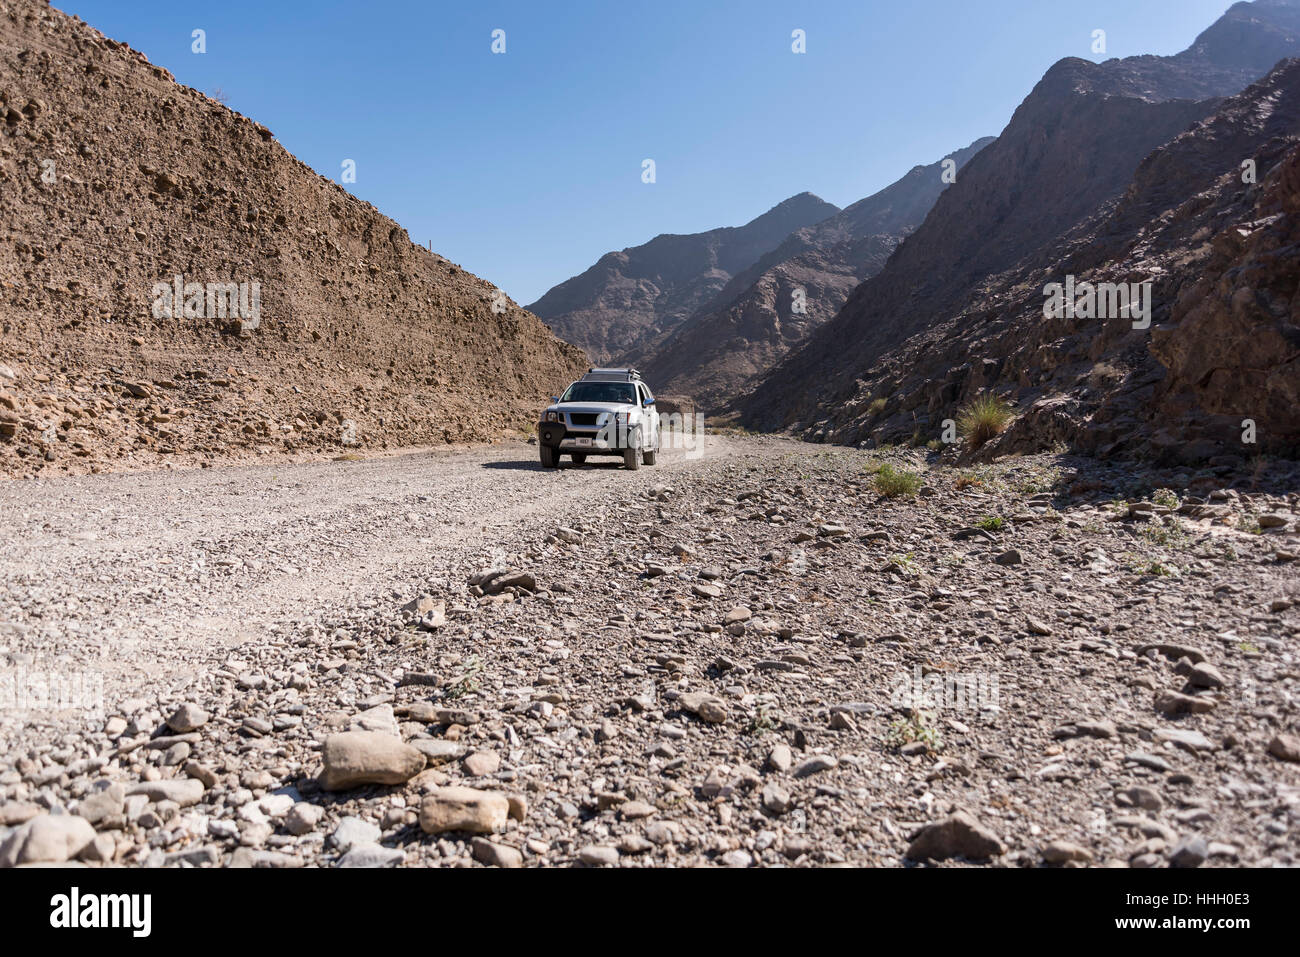 4x4 vehicle in a Wadi (dry riverbed) Stock Photo